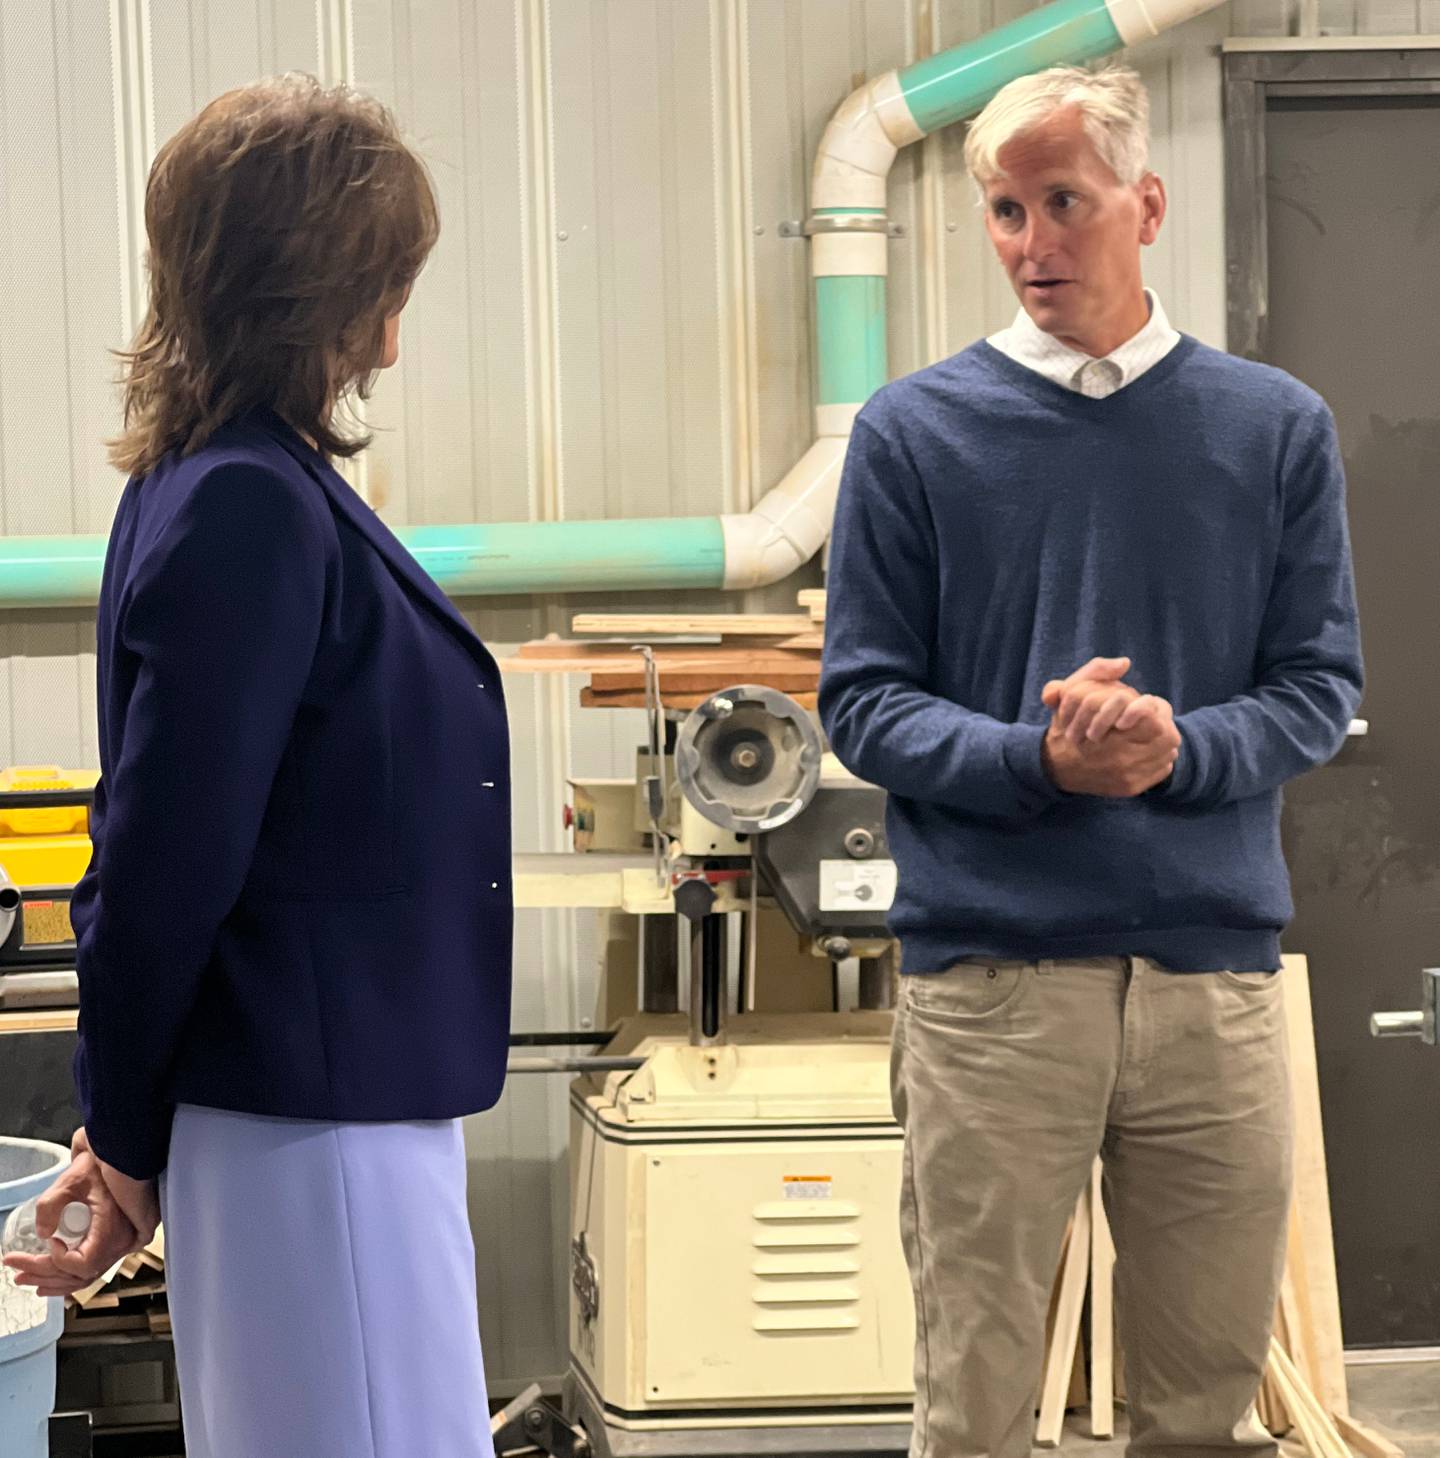 U.S. Rep. Cheri Bustos visits with Morrison Tech President Chris Scott during a Sept. 7 visit in which she presented the school with $1.5 million for its automation and intelligent process control systems field of study.